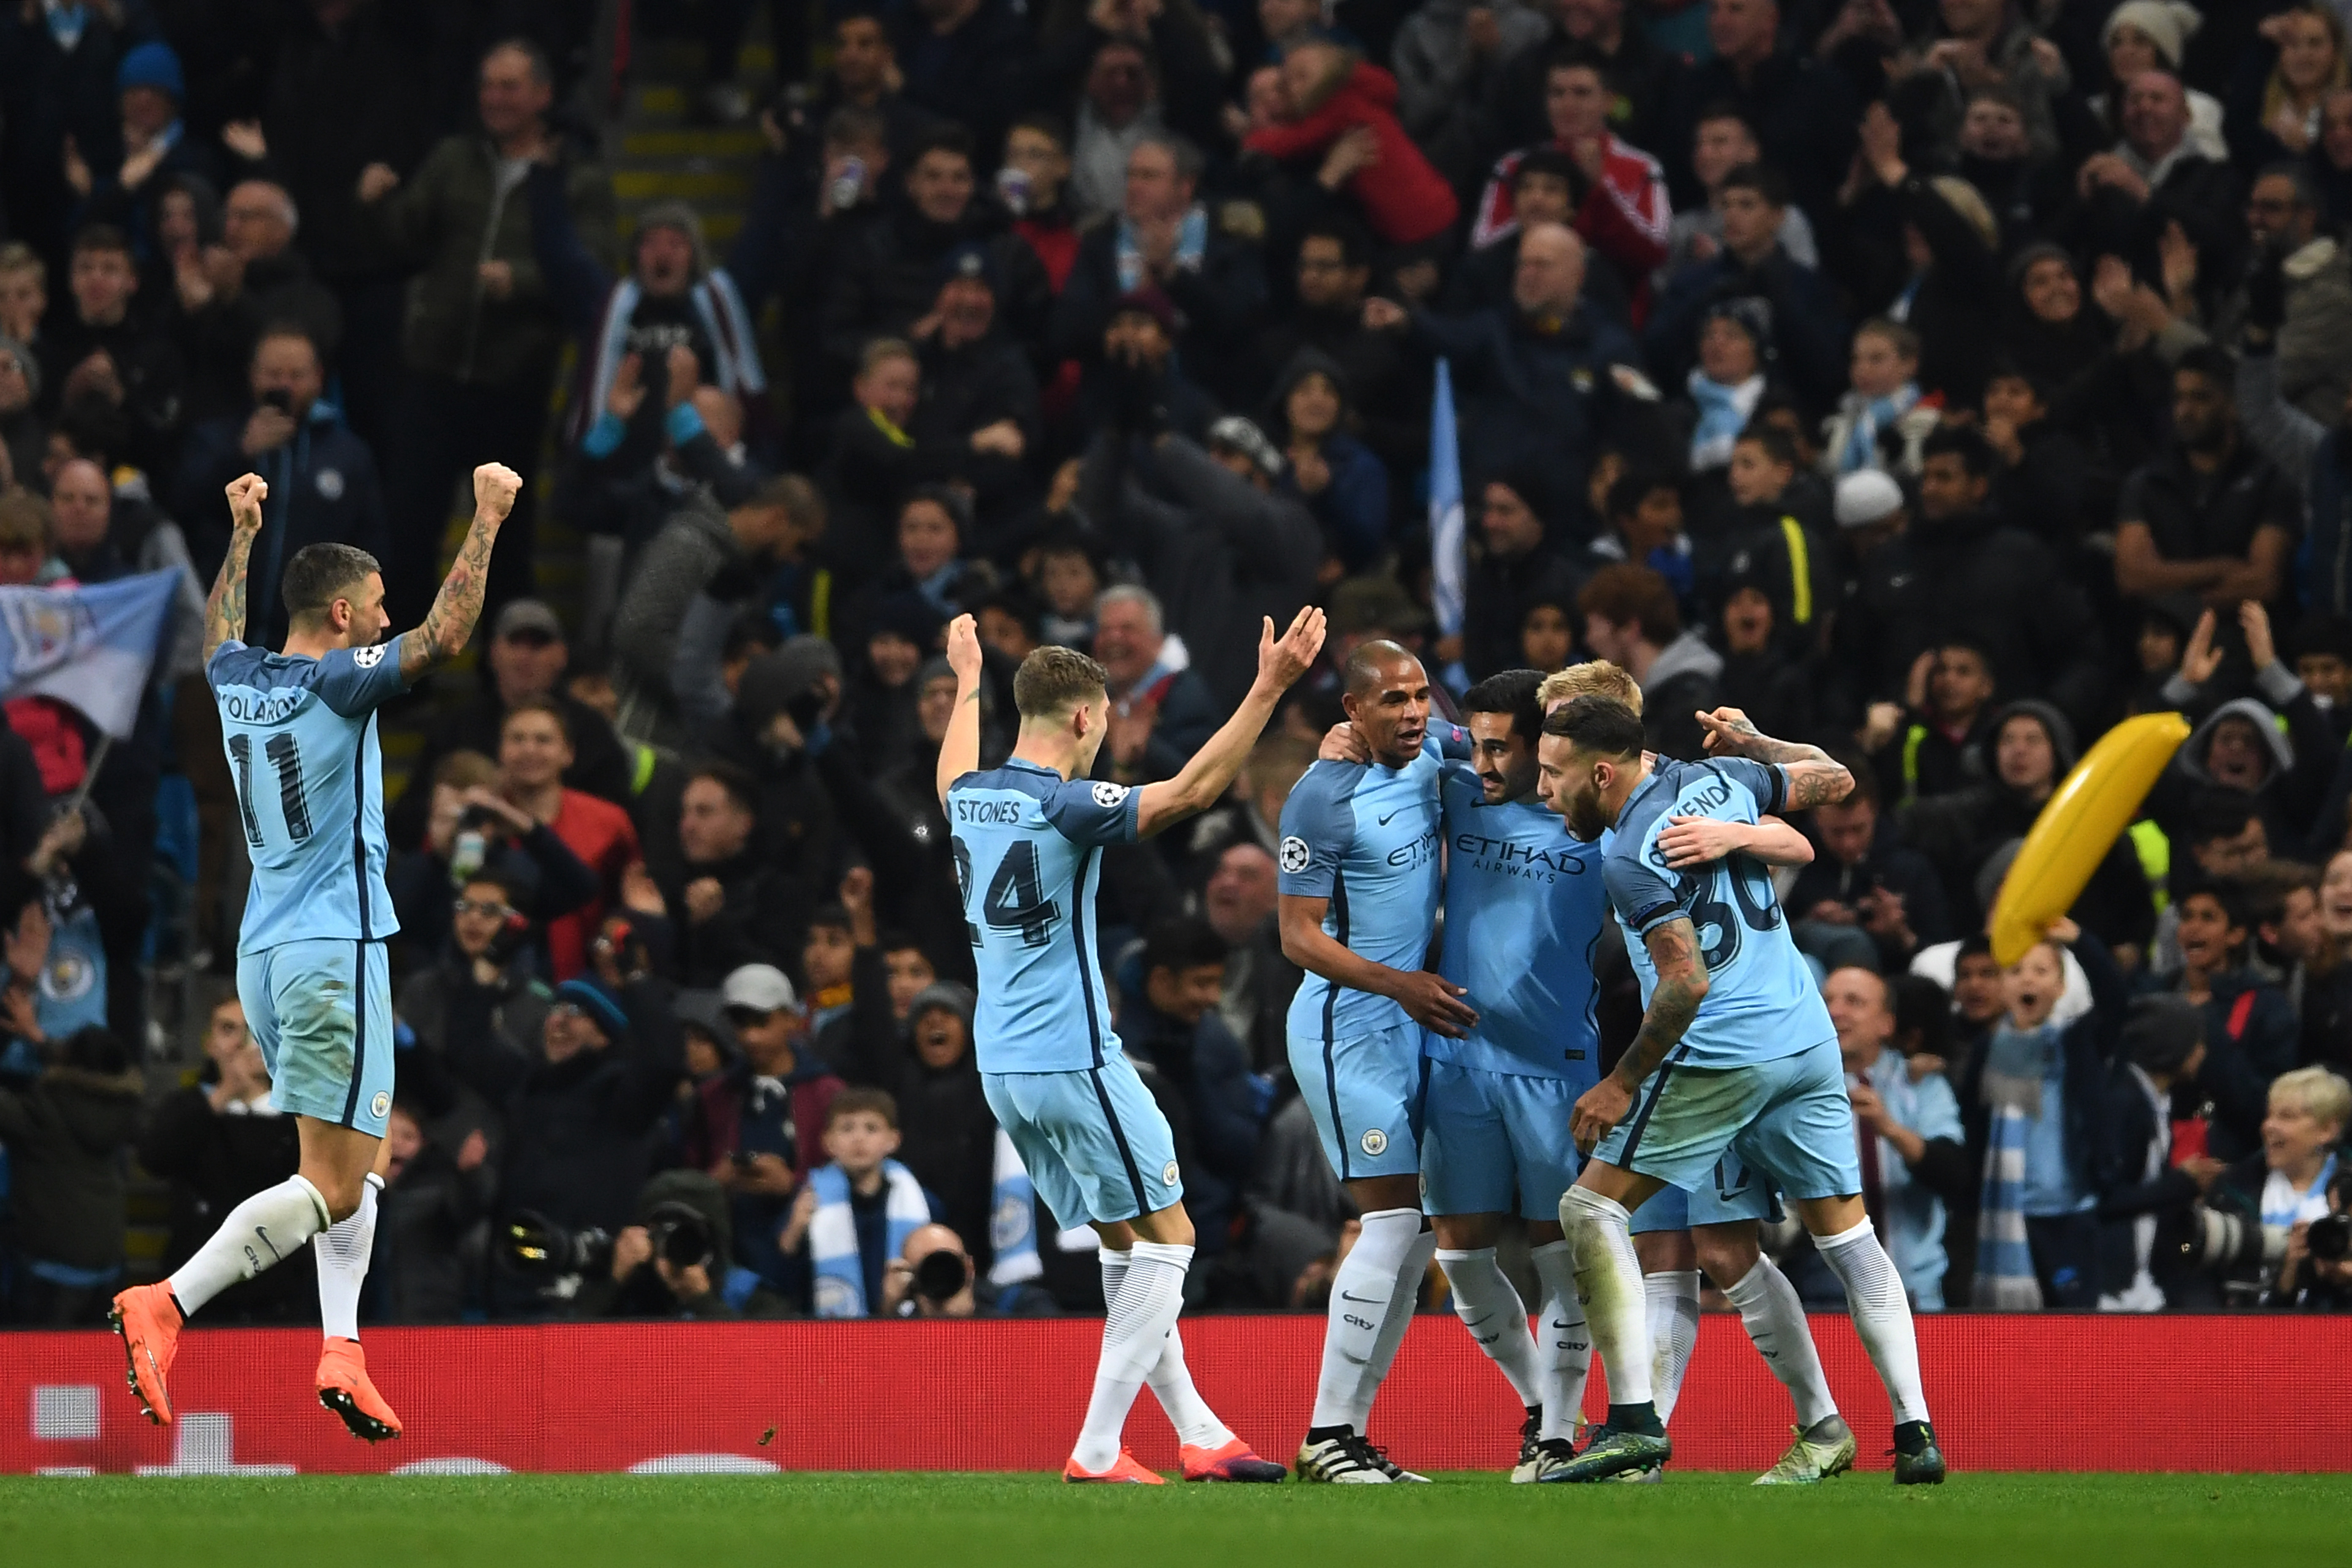 MANCHESTER, ENGLAND - NOVEMBER 01:  Ilkay Gundogan of Manchester City (3R) celebrates with team mates as he scores their third goal during the UEFA Champions League Group C match between Manchester City FC and FC Barcelona at Etihad Stadium on November 1, 2016 in Manchester, England.  (Photo by Laurence Griffiths/Getty Images)